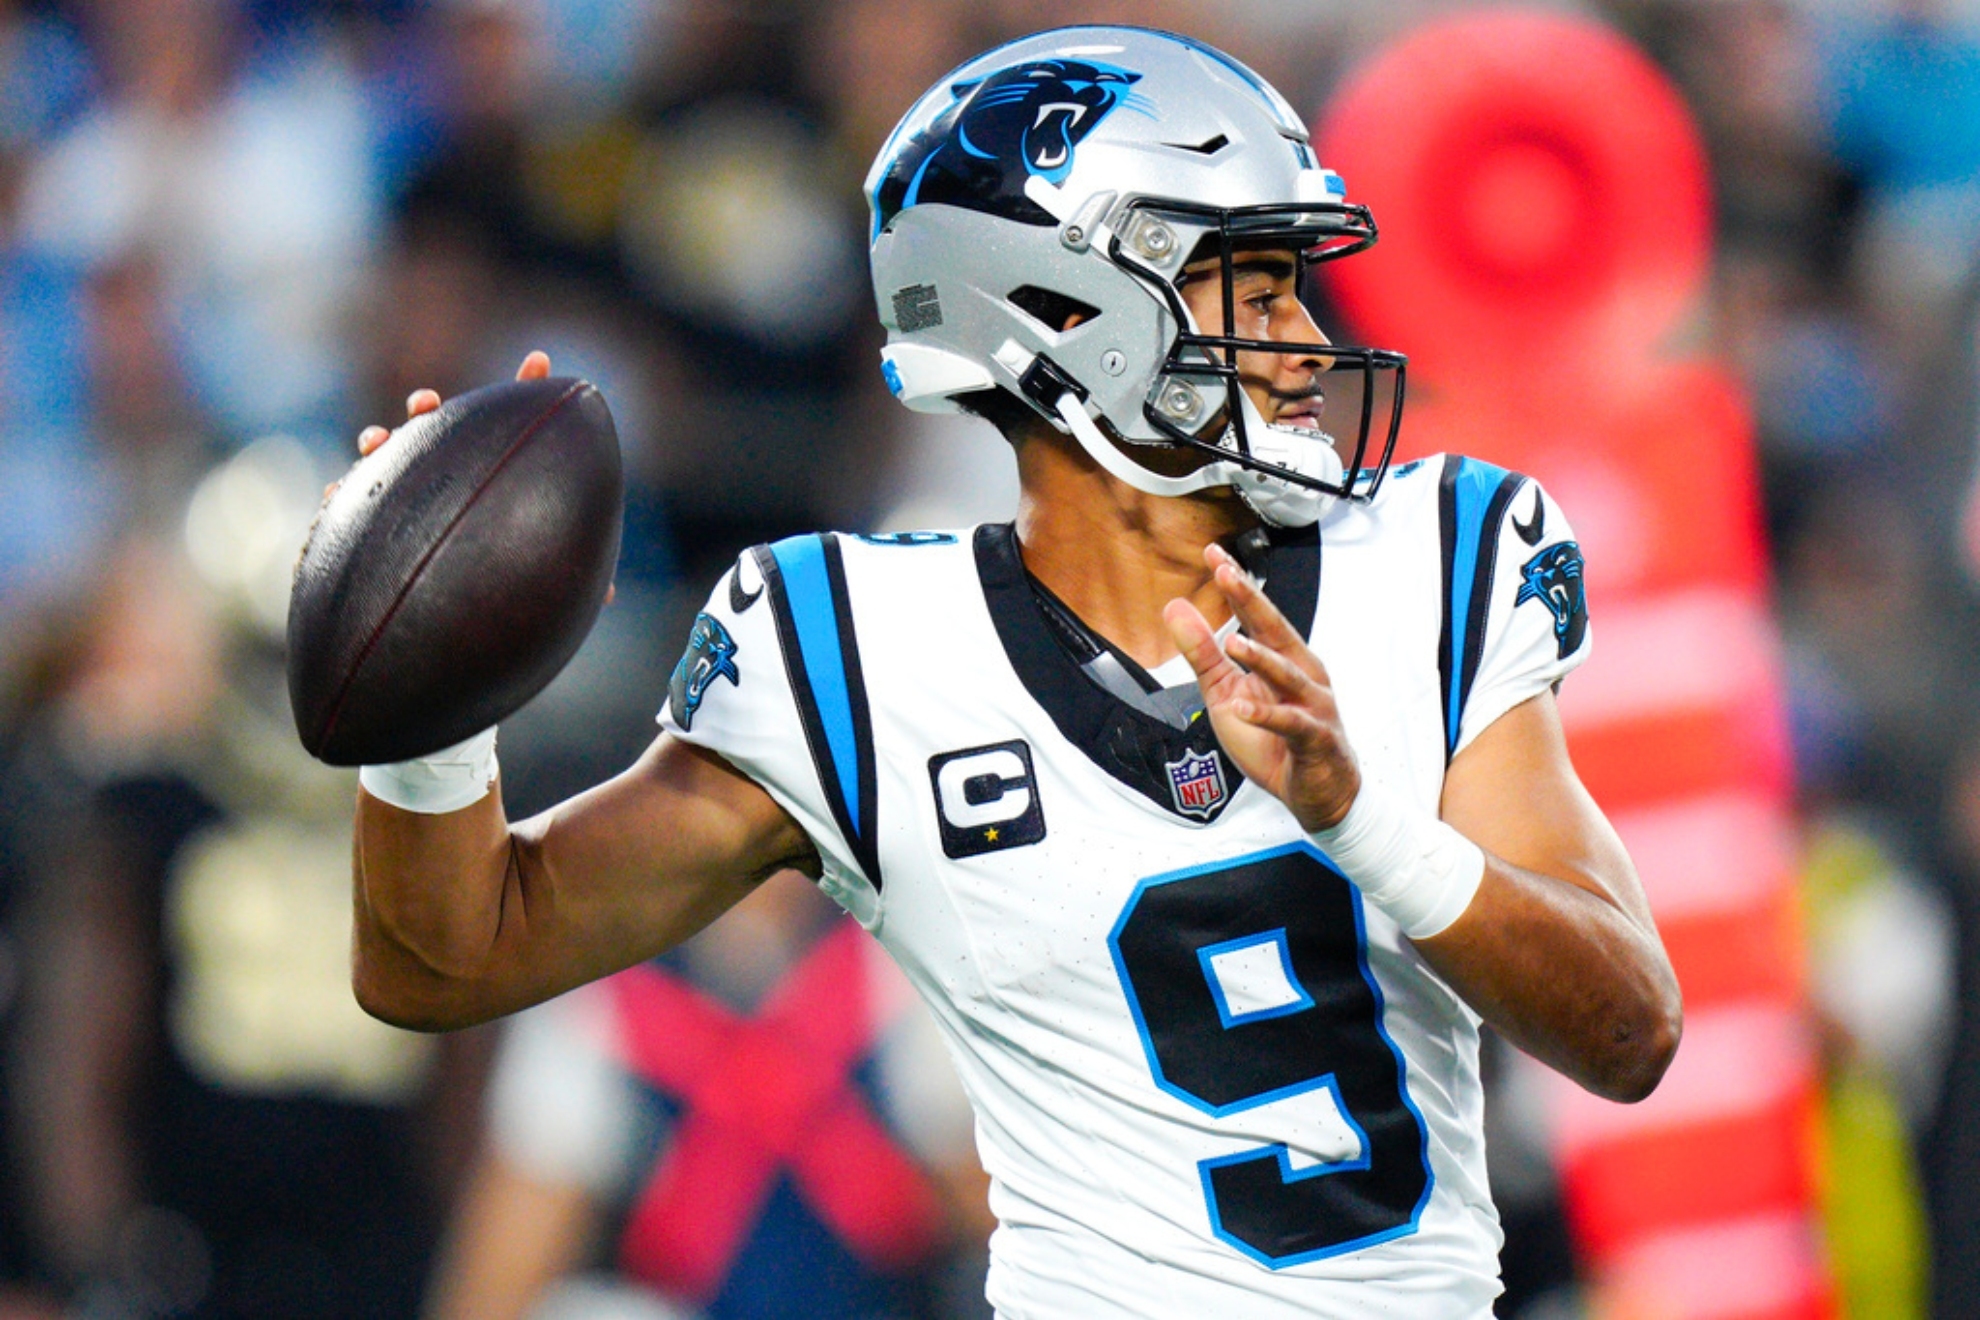 Young missed the Panthers' Week 3 game against the Seahawks